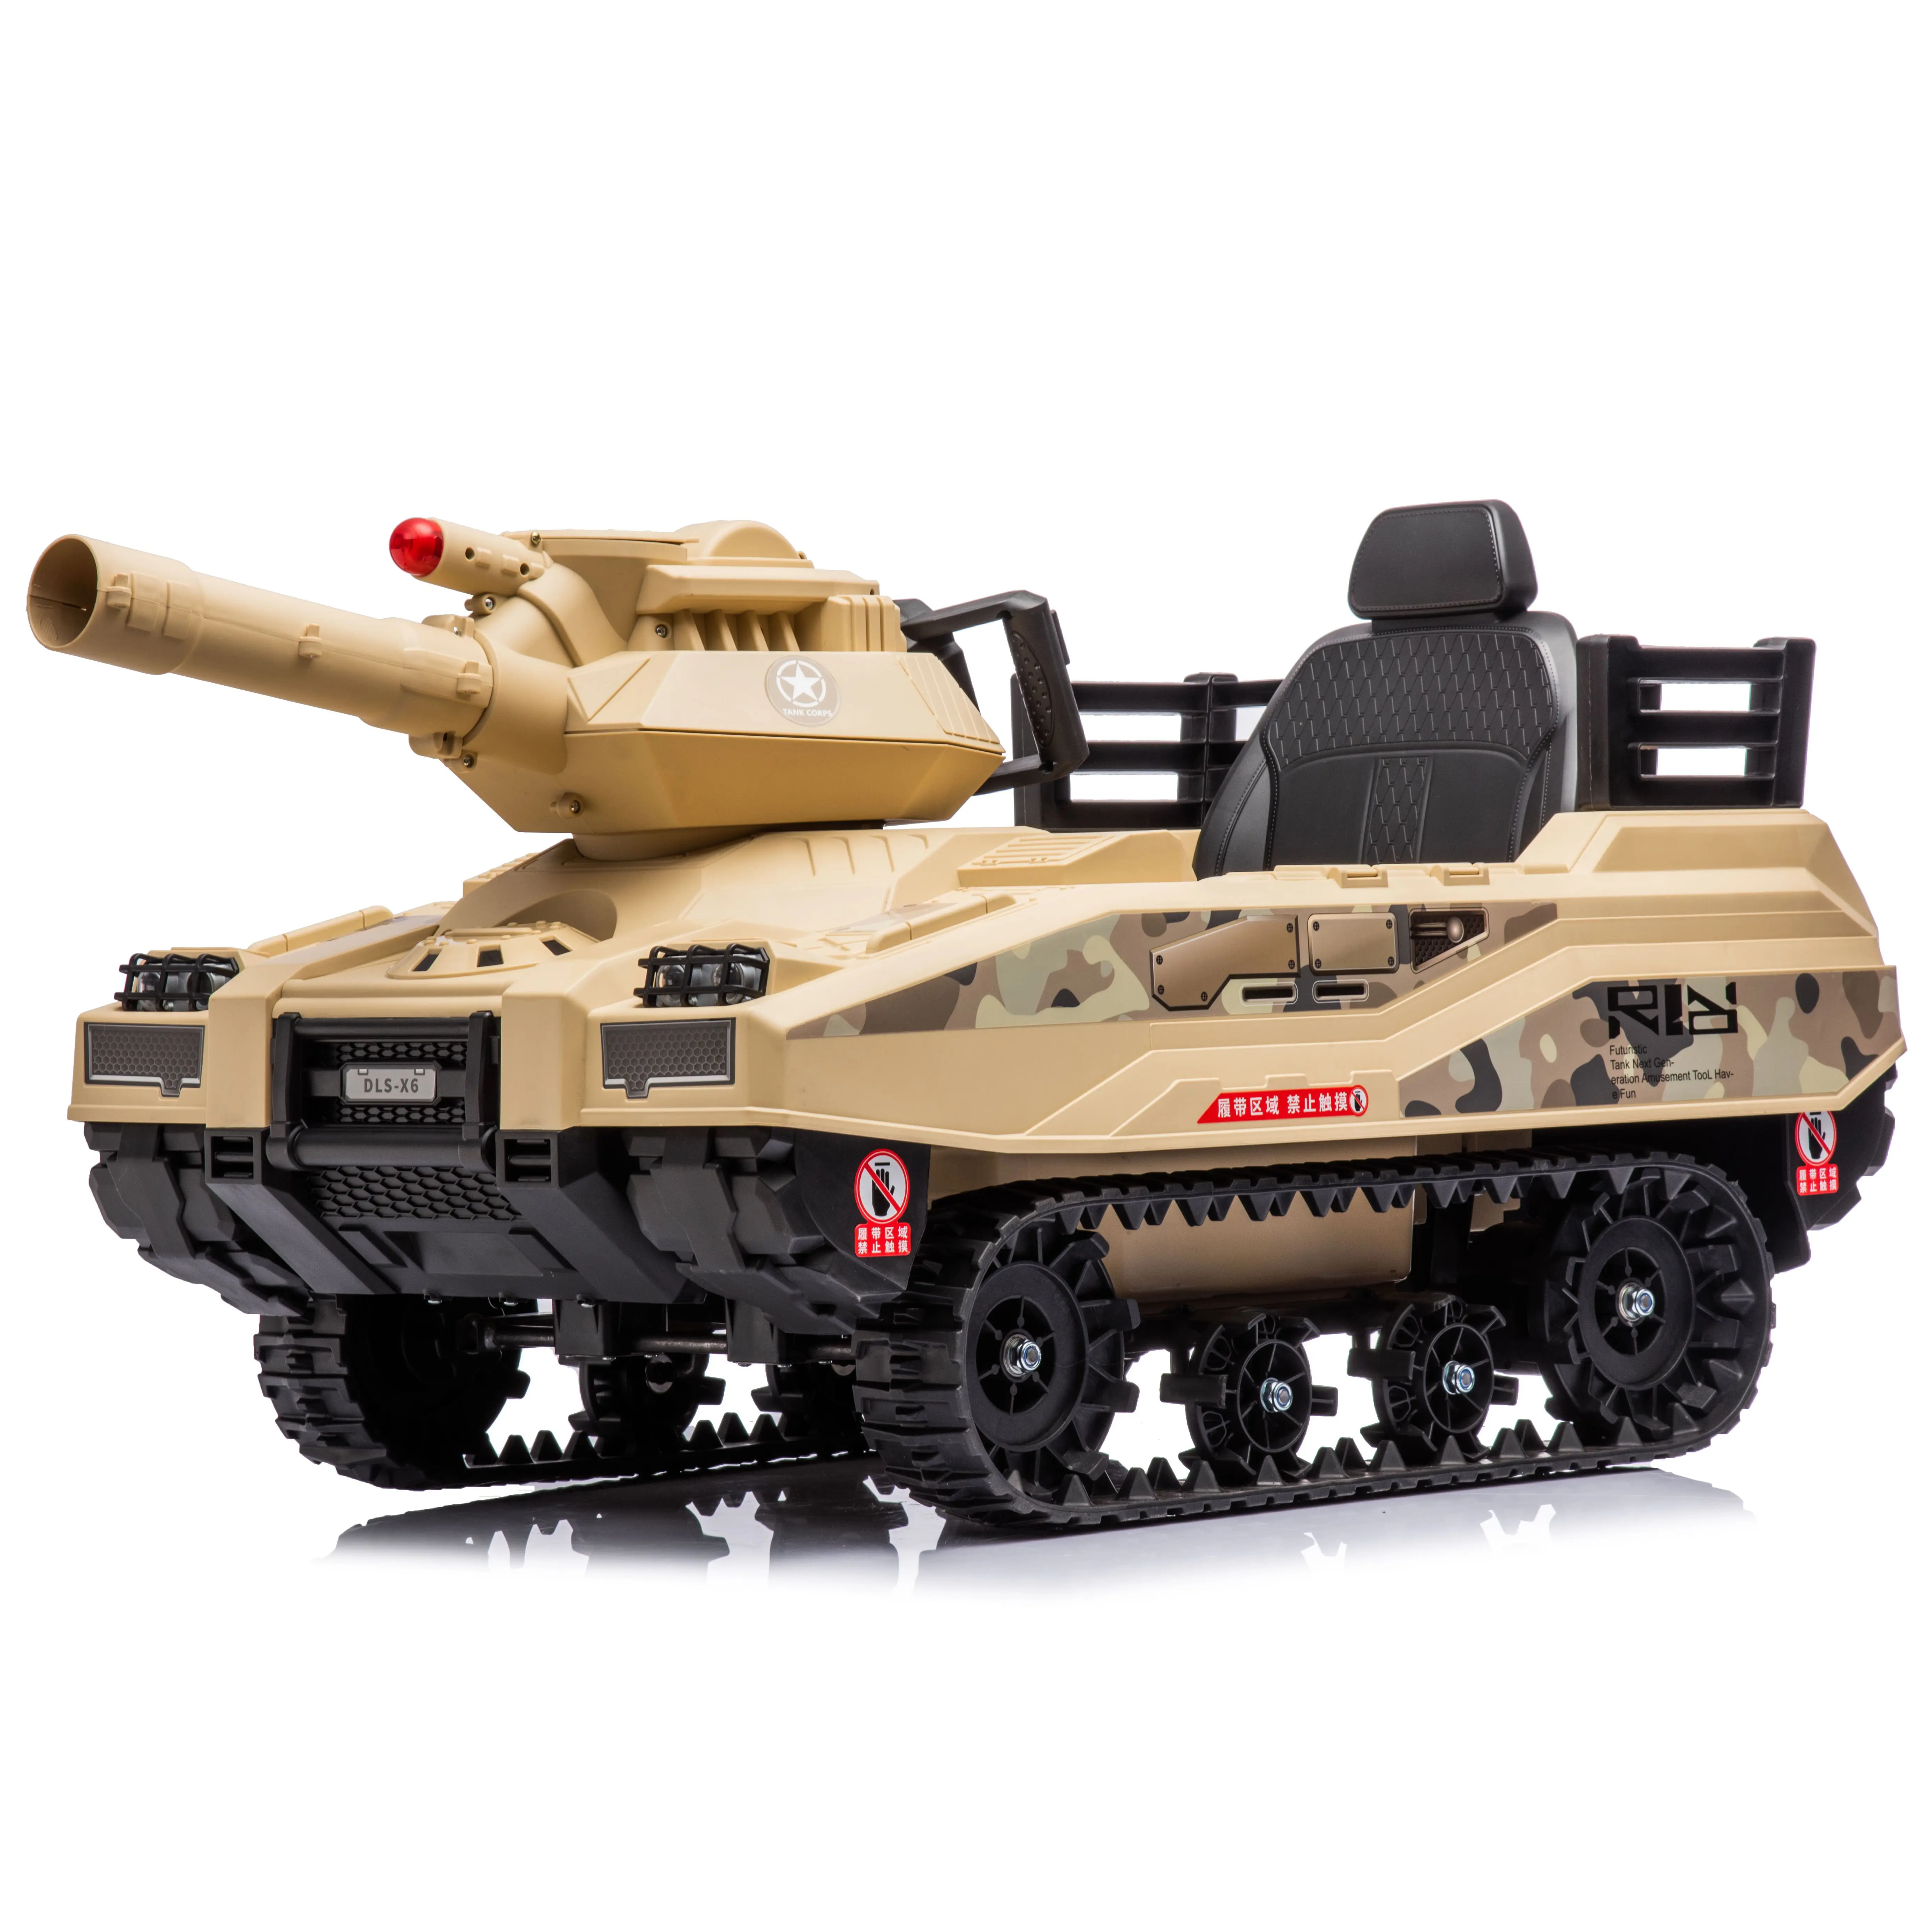 Wholesale 24v Battery Kids Ride on Tank Toy With Remote Control Children Electric Ride On Car Toy For Kids To Drive